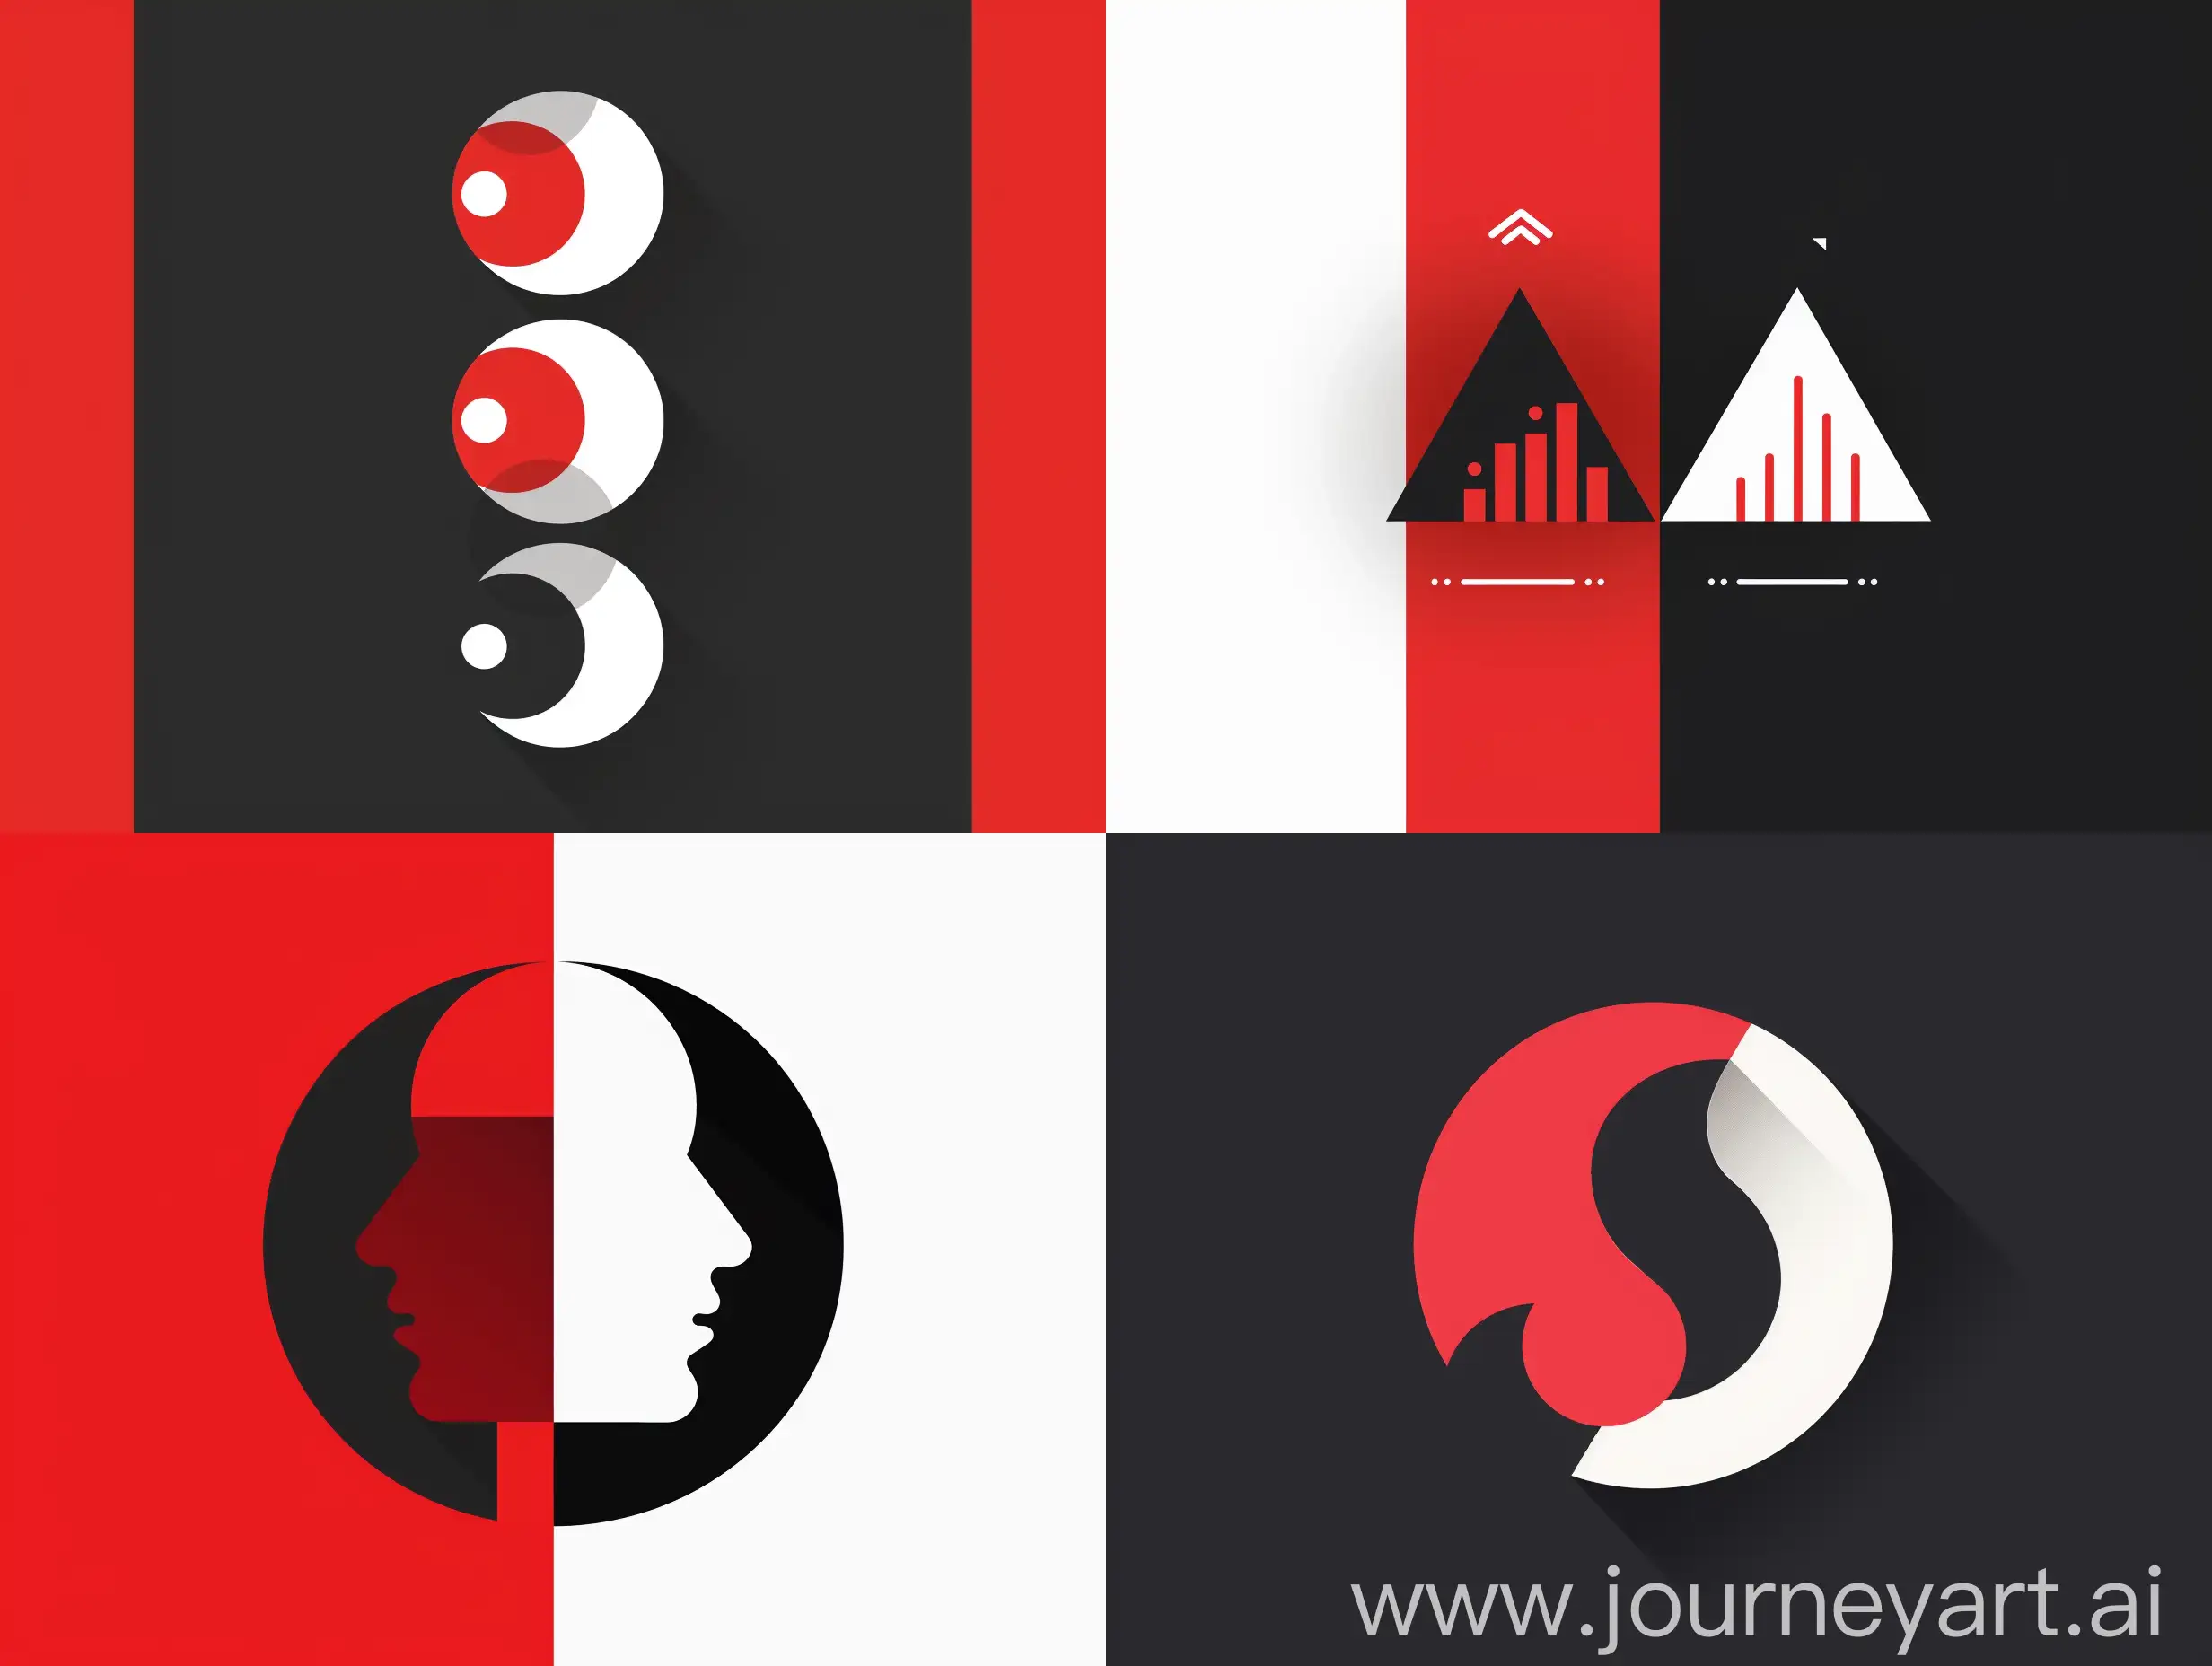 create me logo icon for agency scoreminds , color : red, black white. flat simple modern min8malistic